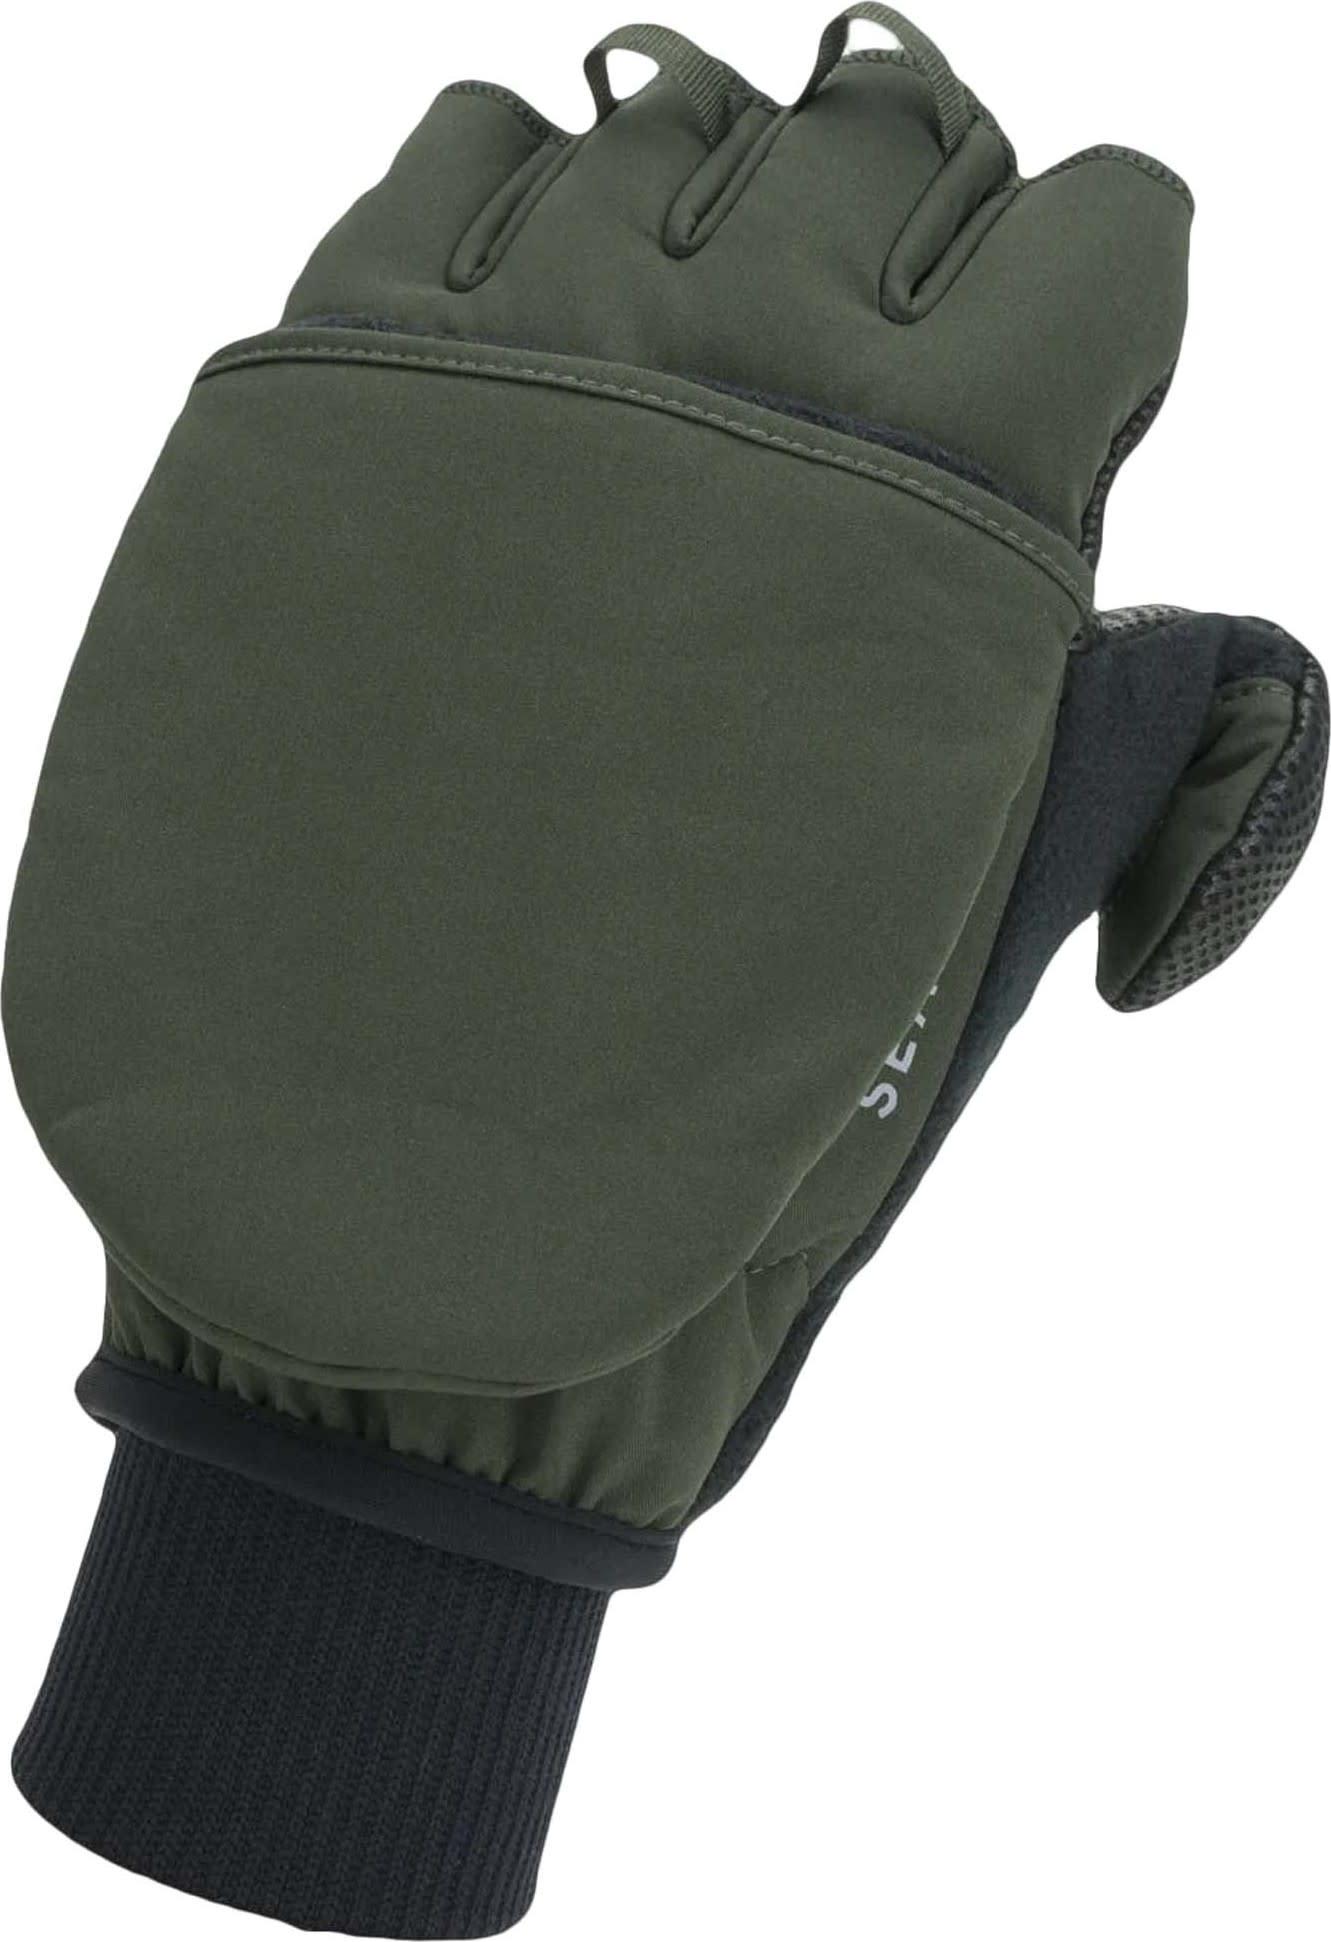 Windproof Cold Weather Convertible Mitt Olive Green/Black